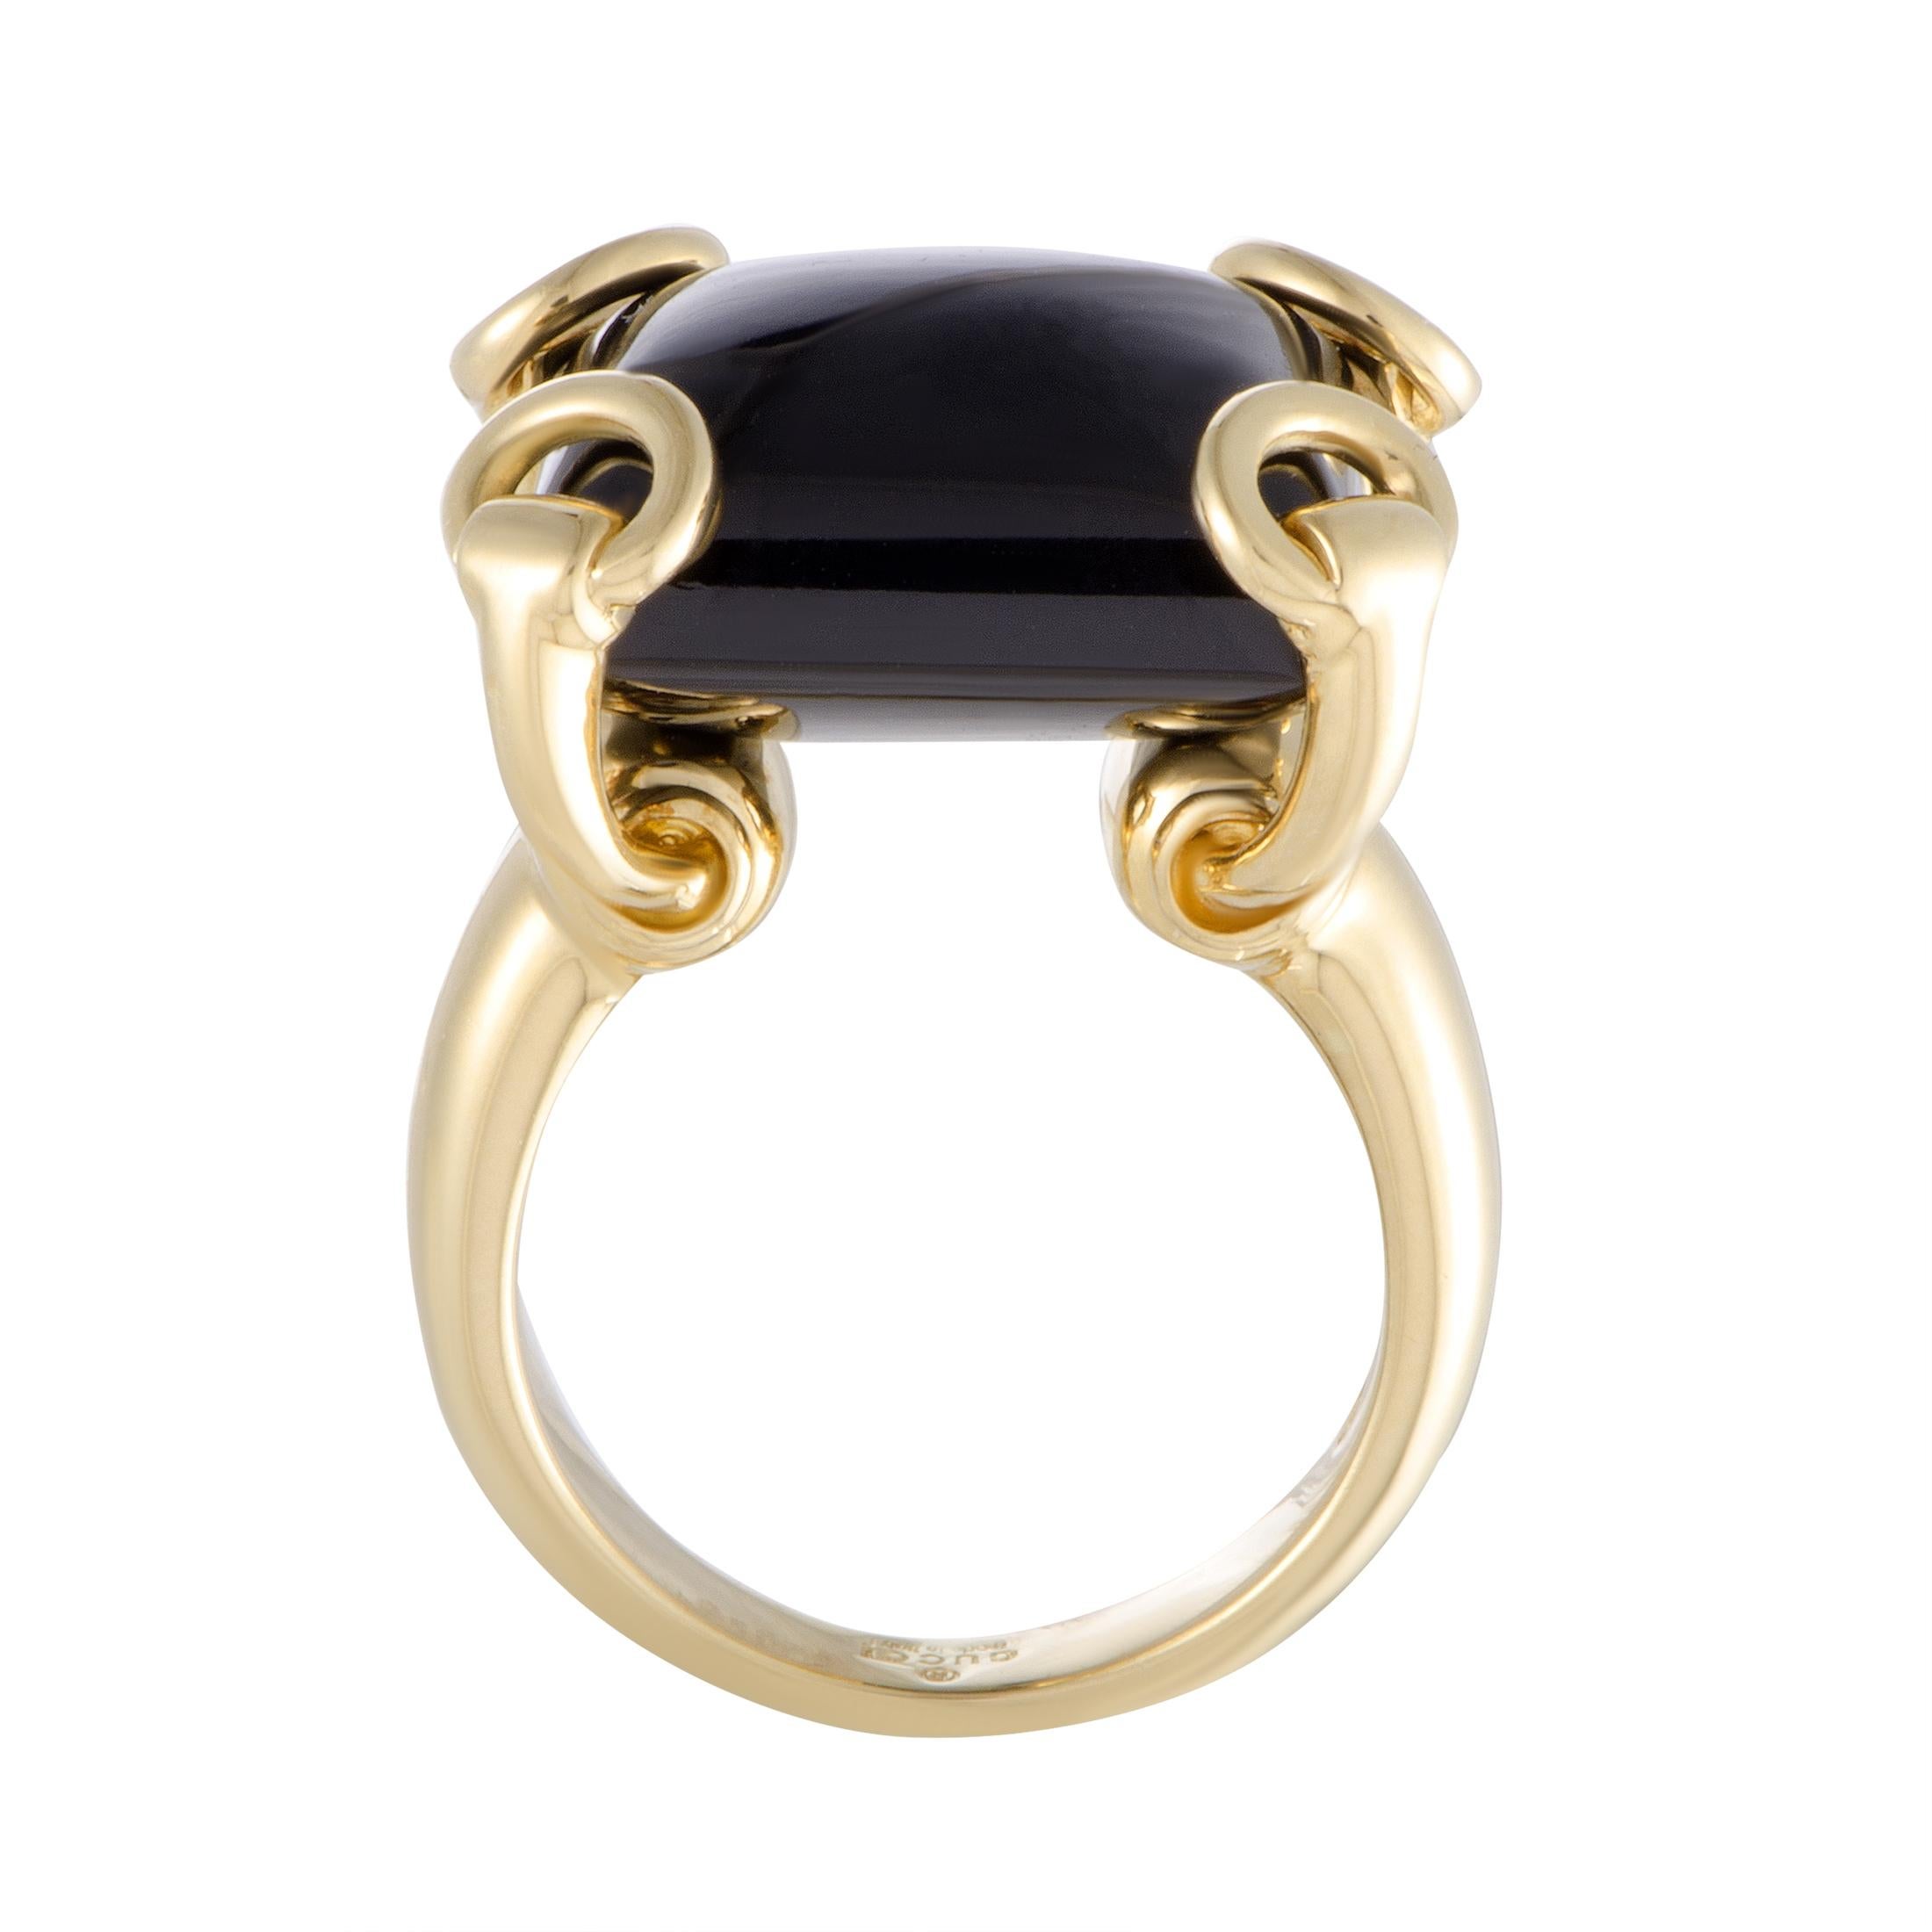 Gucci makes a bold statement with this 18K  yellow gold and onyx cocktail ring - the smooth cabochon of onyx is held in place in each corner by the Gucci horsebit in gold.
Ring Top Dimensions: 15mm x 20mm